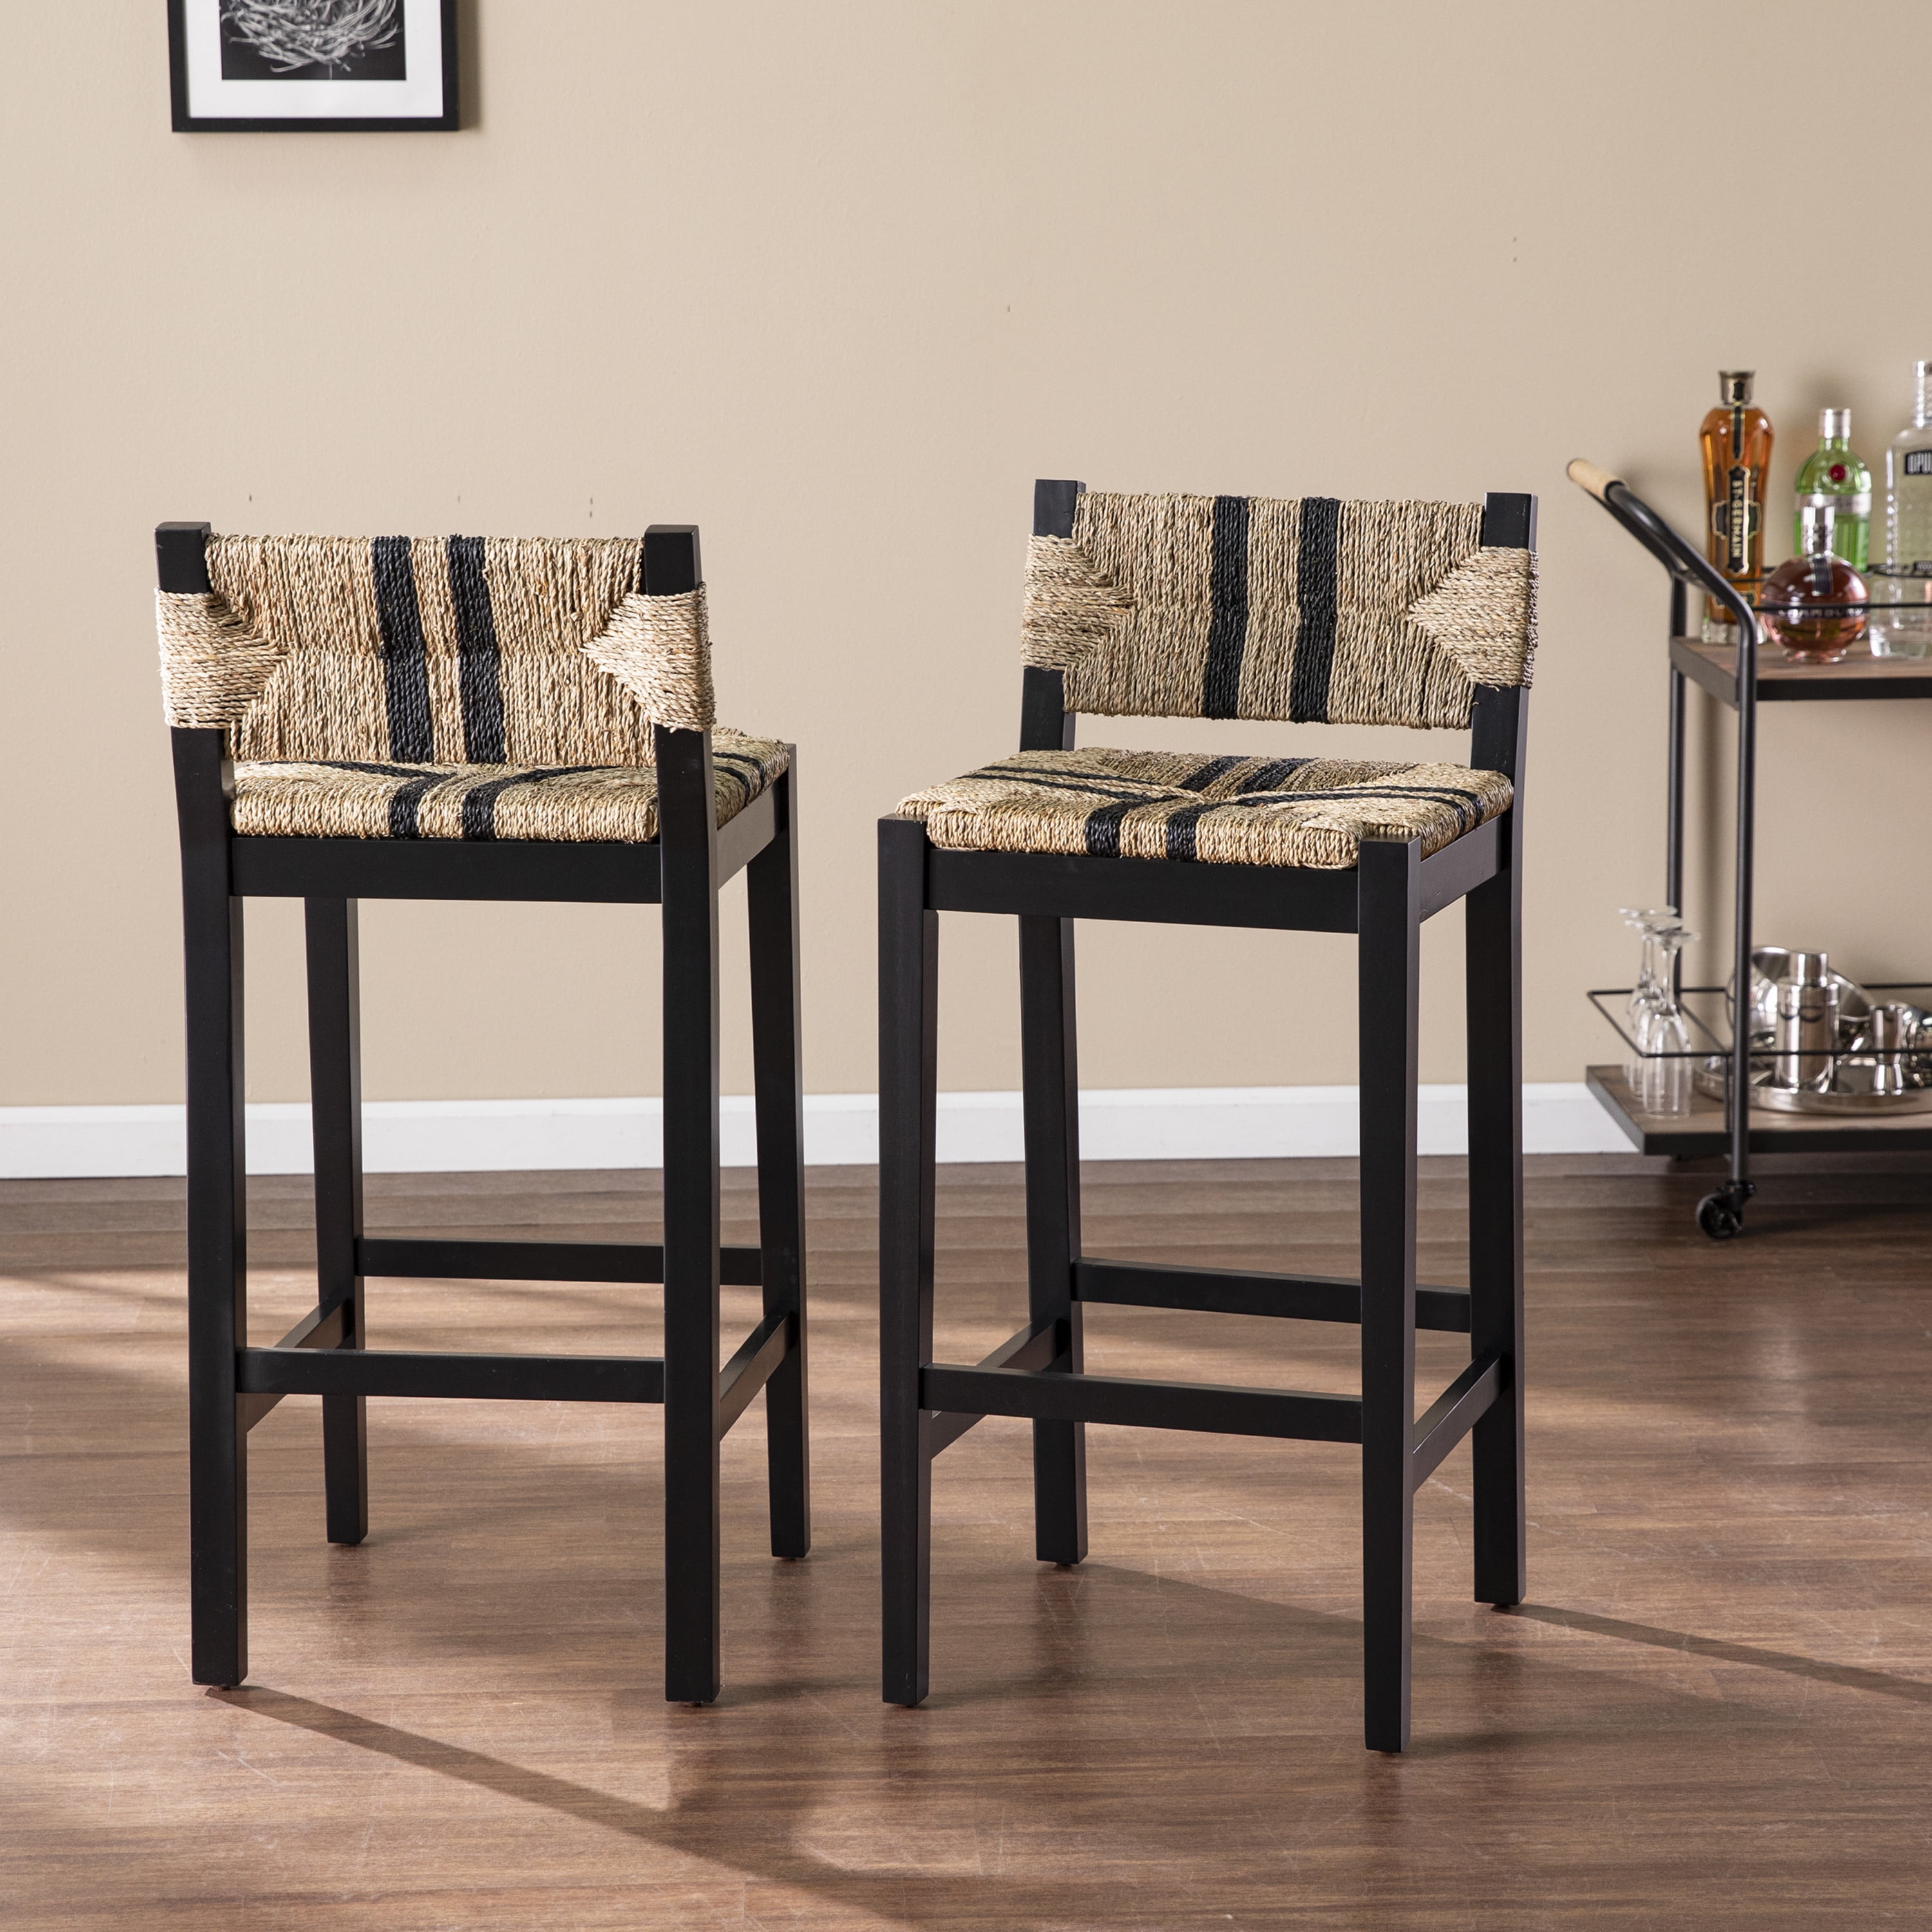 SEI Galiah Transitional style Seagrass Barstools – 2pc Set in Black and  natural finish